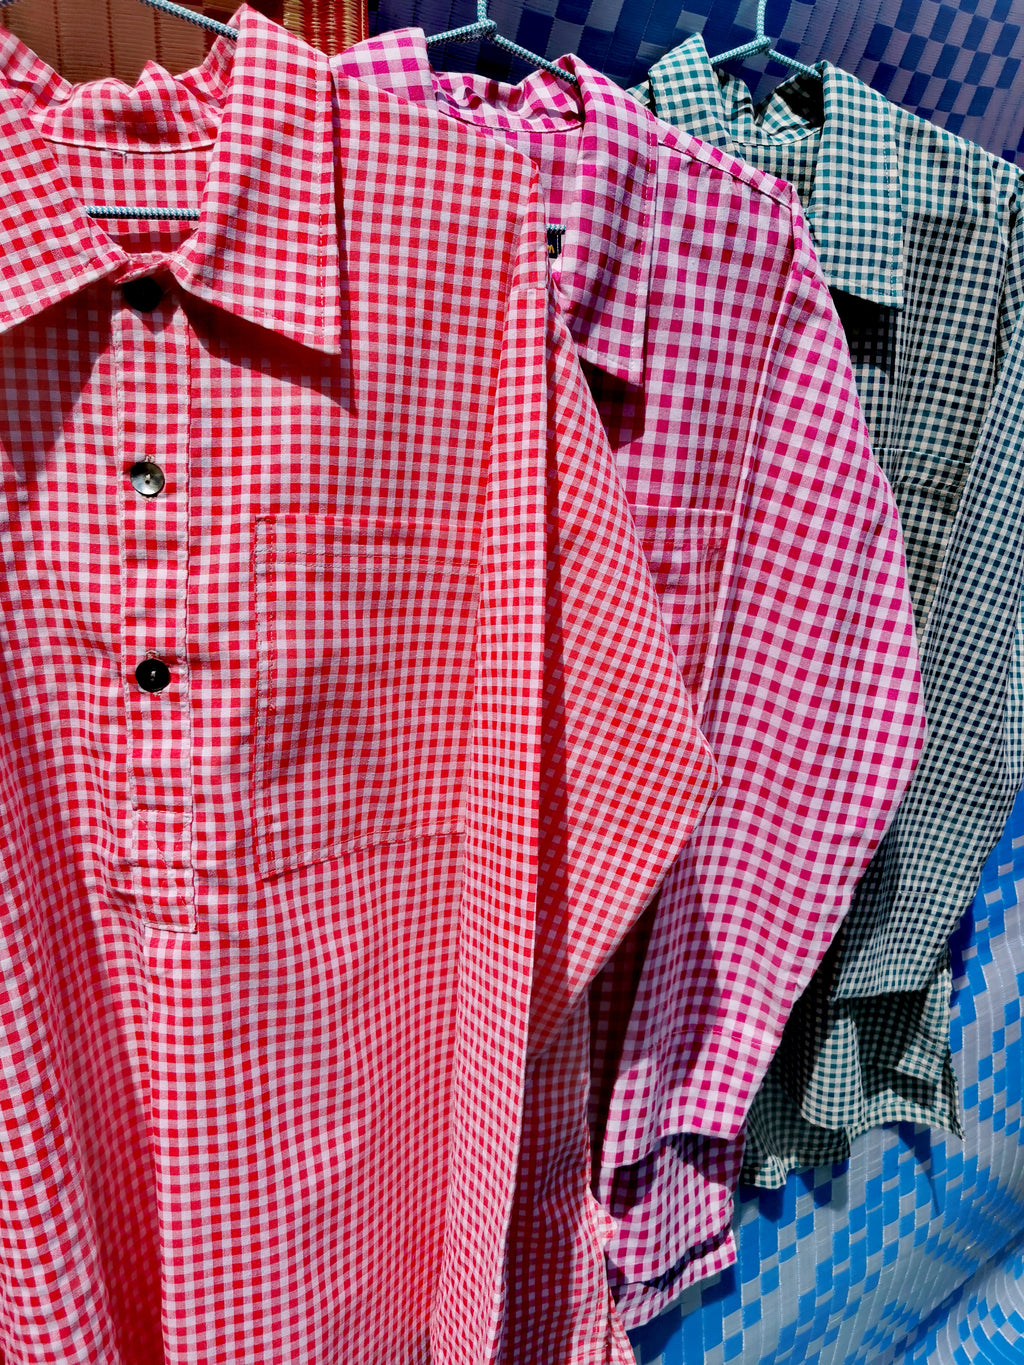 Our French smock shirt design suits both men and women of a variety of shapes and sizes, worn in a multitude of styles! Made in graphic but sweet gingham, 100% cotton.

Handmade in Thailand working with the same family of seamstresses for 25 years. Patterns and sampling made here in the UK by our founder Anna Moody.

One Size 

Bust 49"

Length 33"

Sleeve 24"

Machine wash at 30.

 

 

